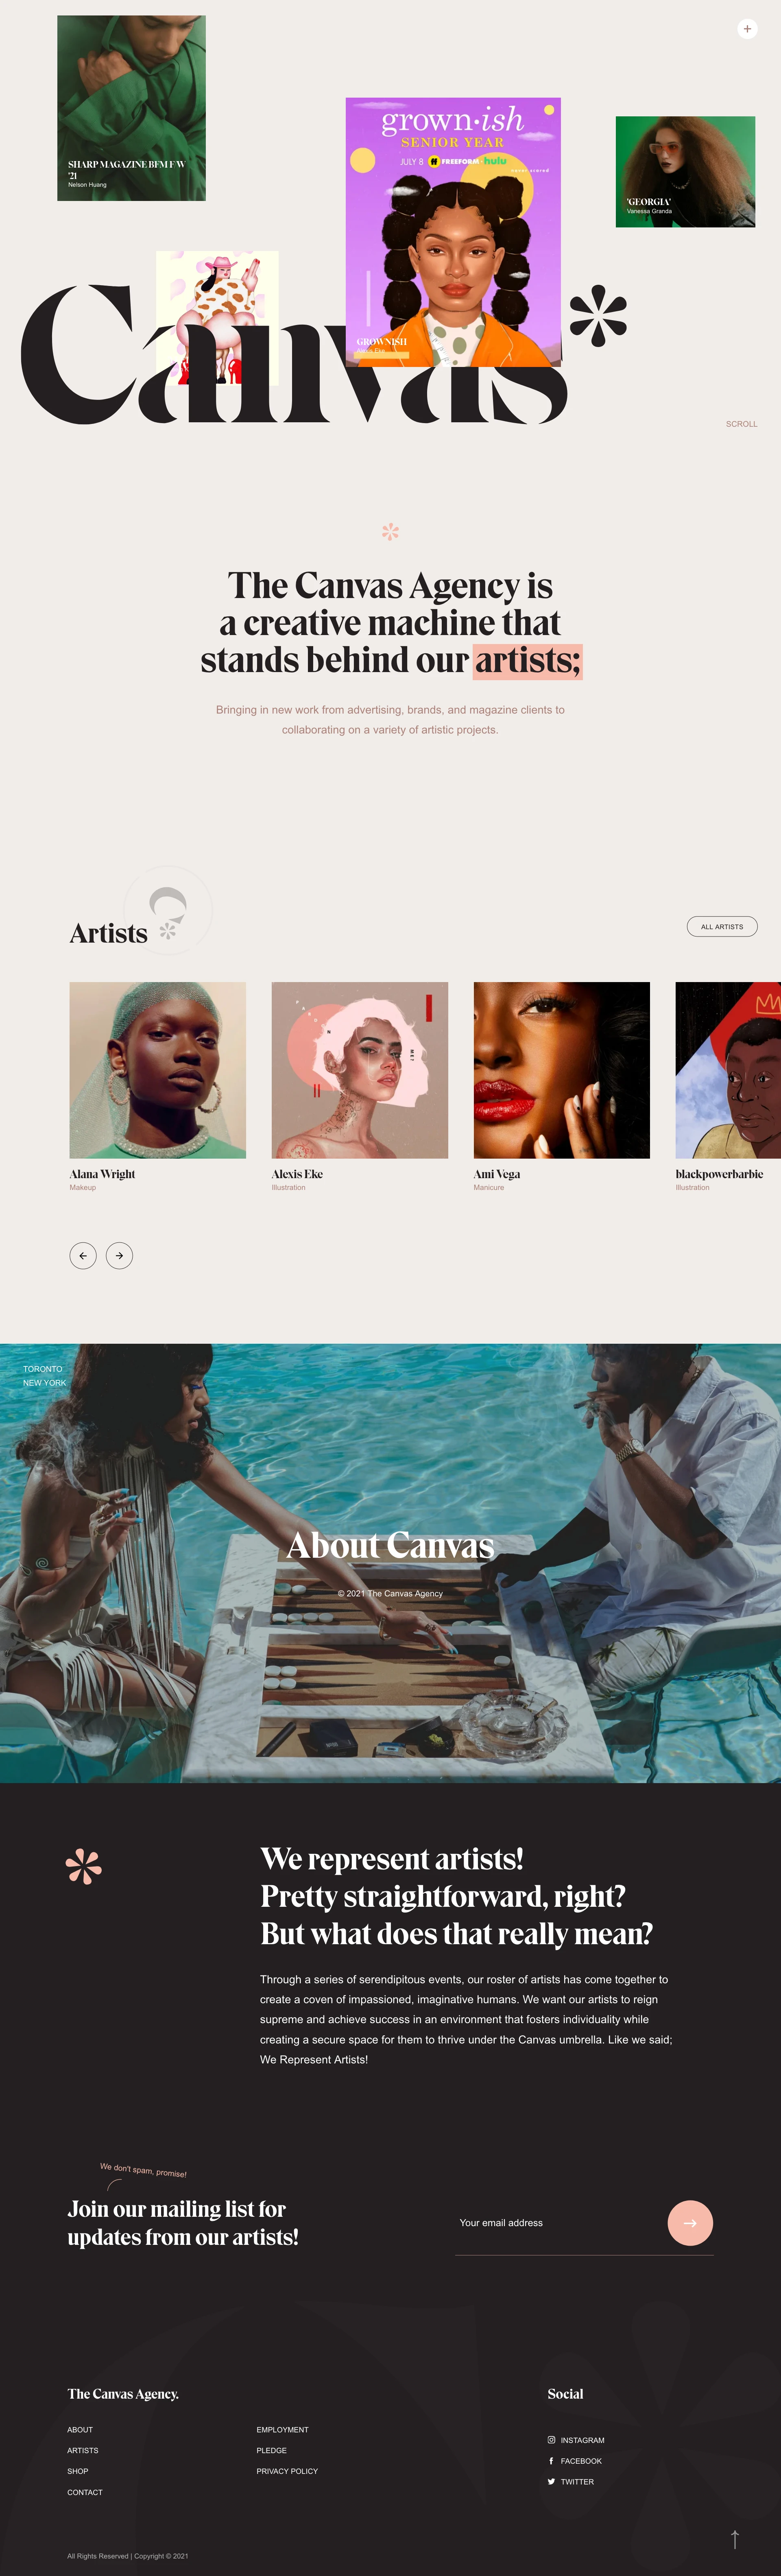 Canvas Agency Landing Page Example: We represent artists, creating a coven of impassioned, imaginative humans. We want our artists to reign supreme and achieve success in an environment that fosters individuality while creating a secure space for them to thrive under the Canvas umbrella.